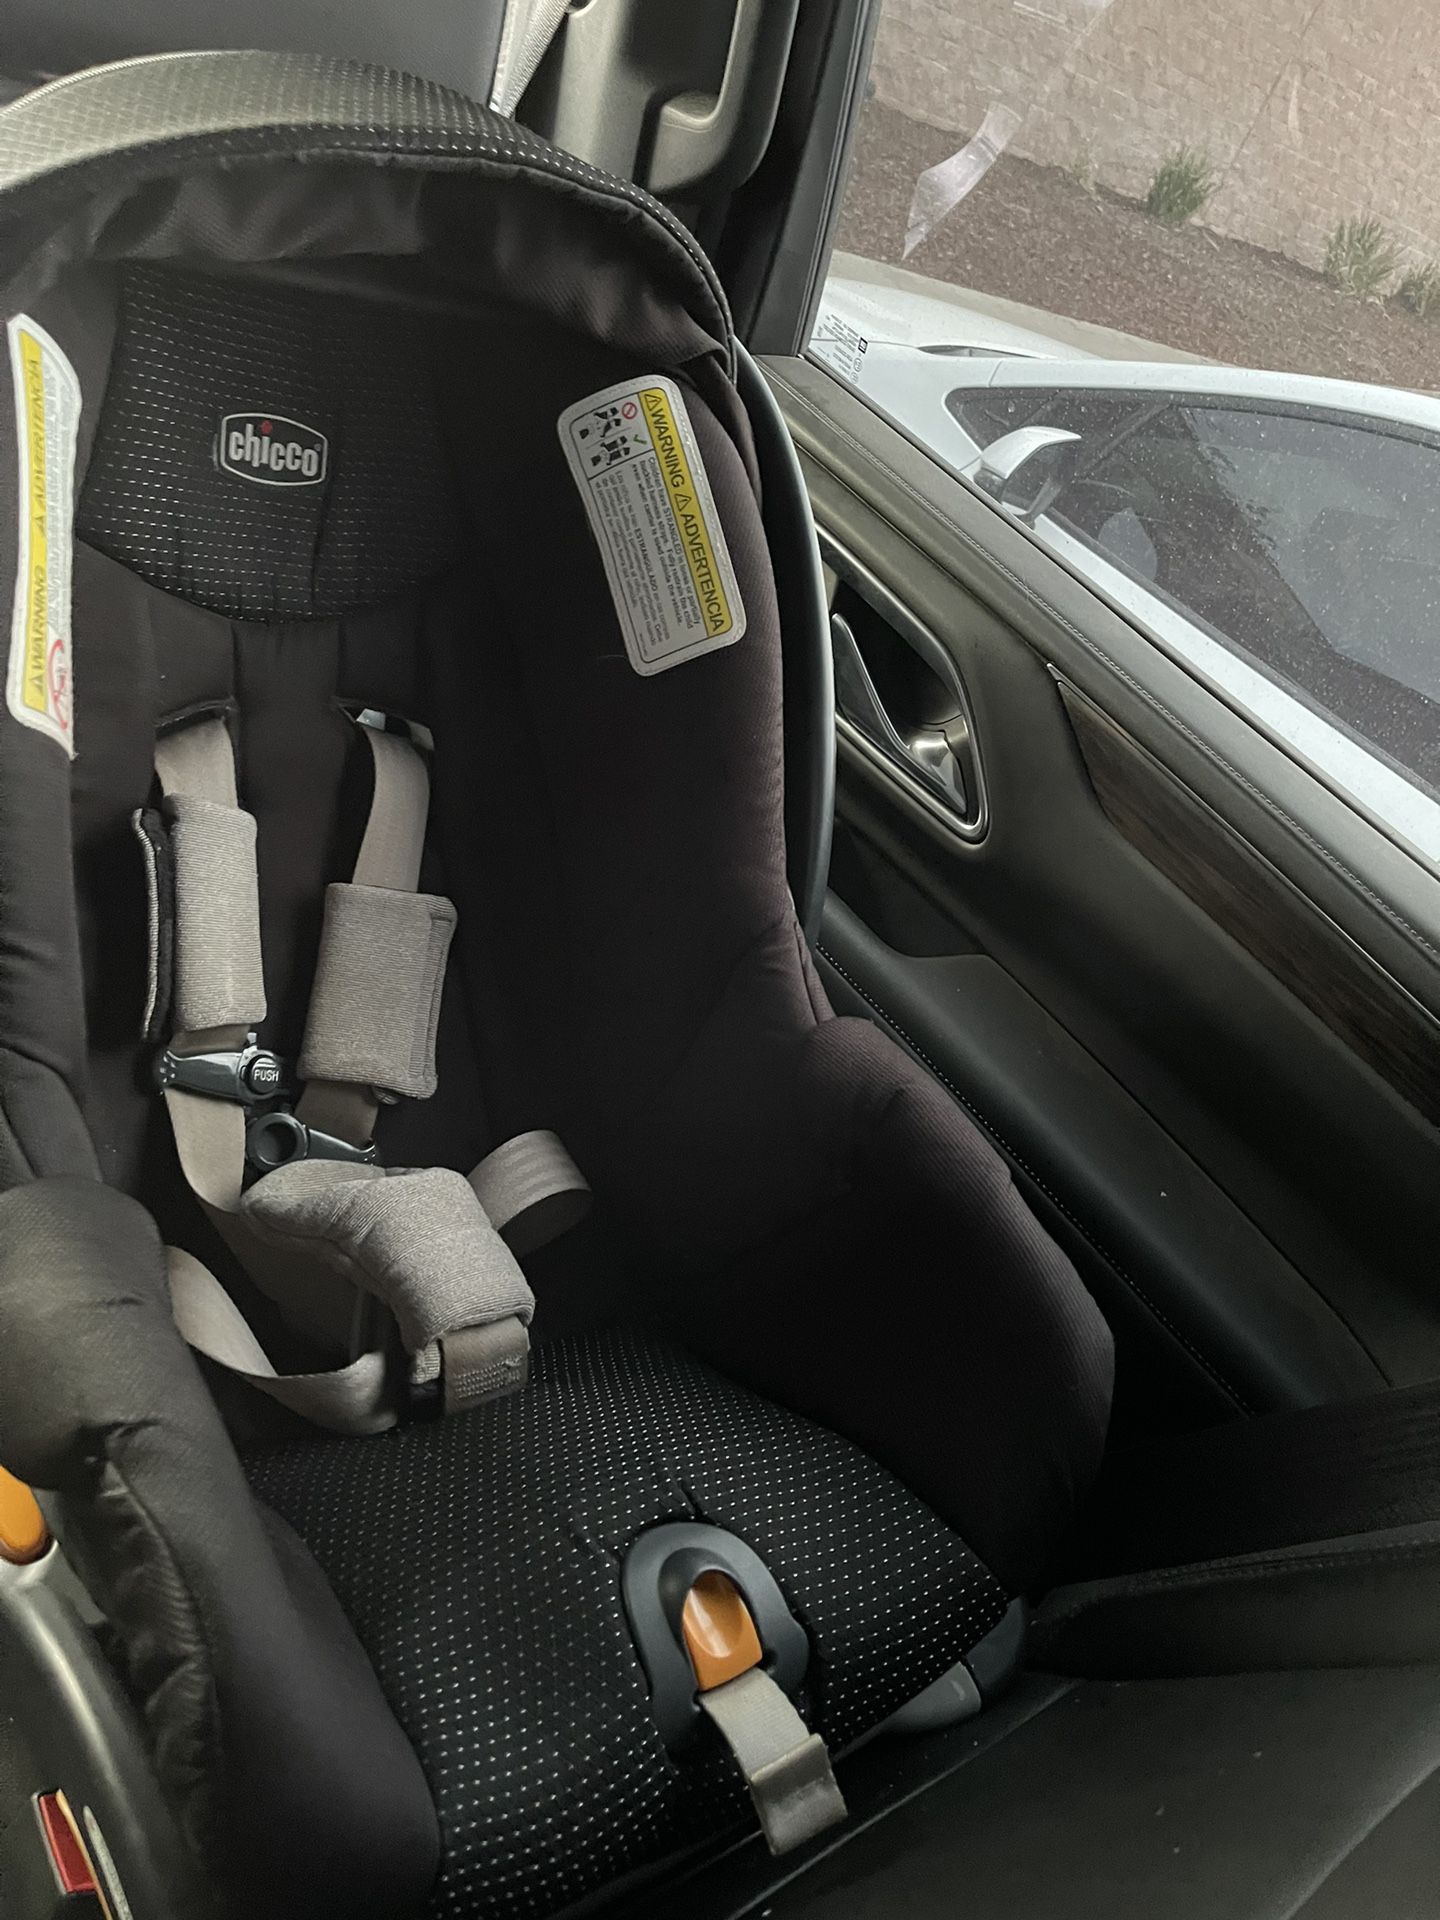 Chicco KeyFit 30 and KeyFit Infant Car Seat Base